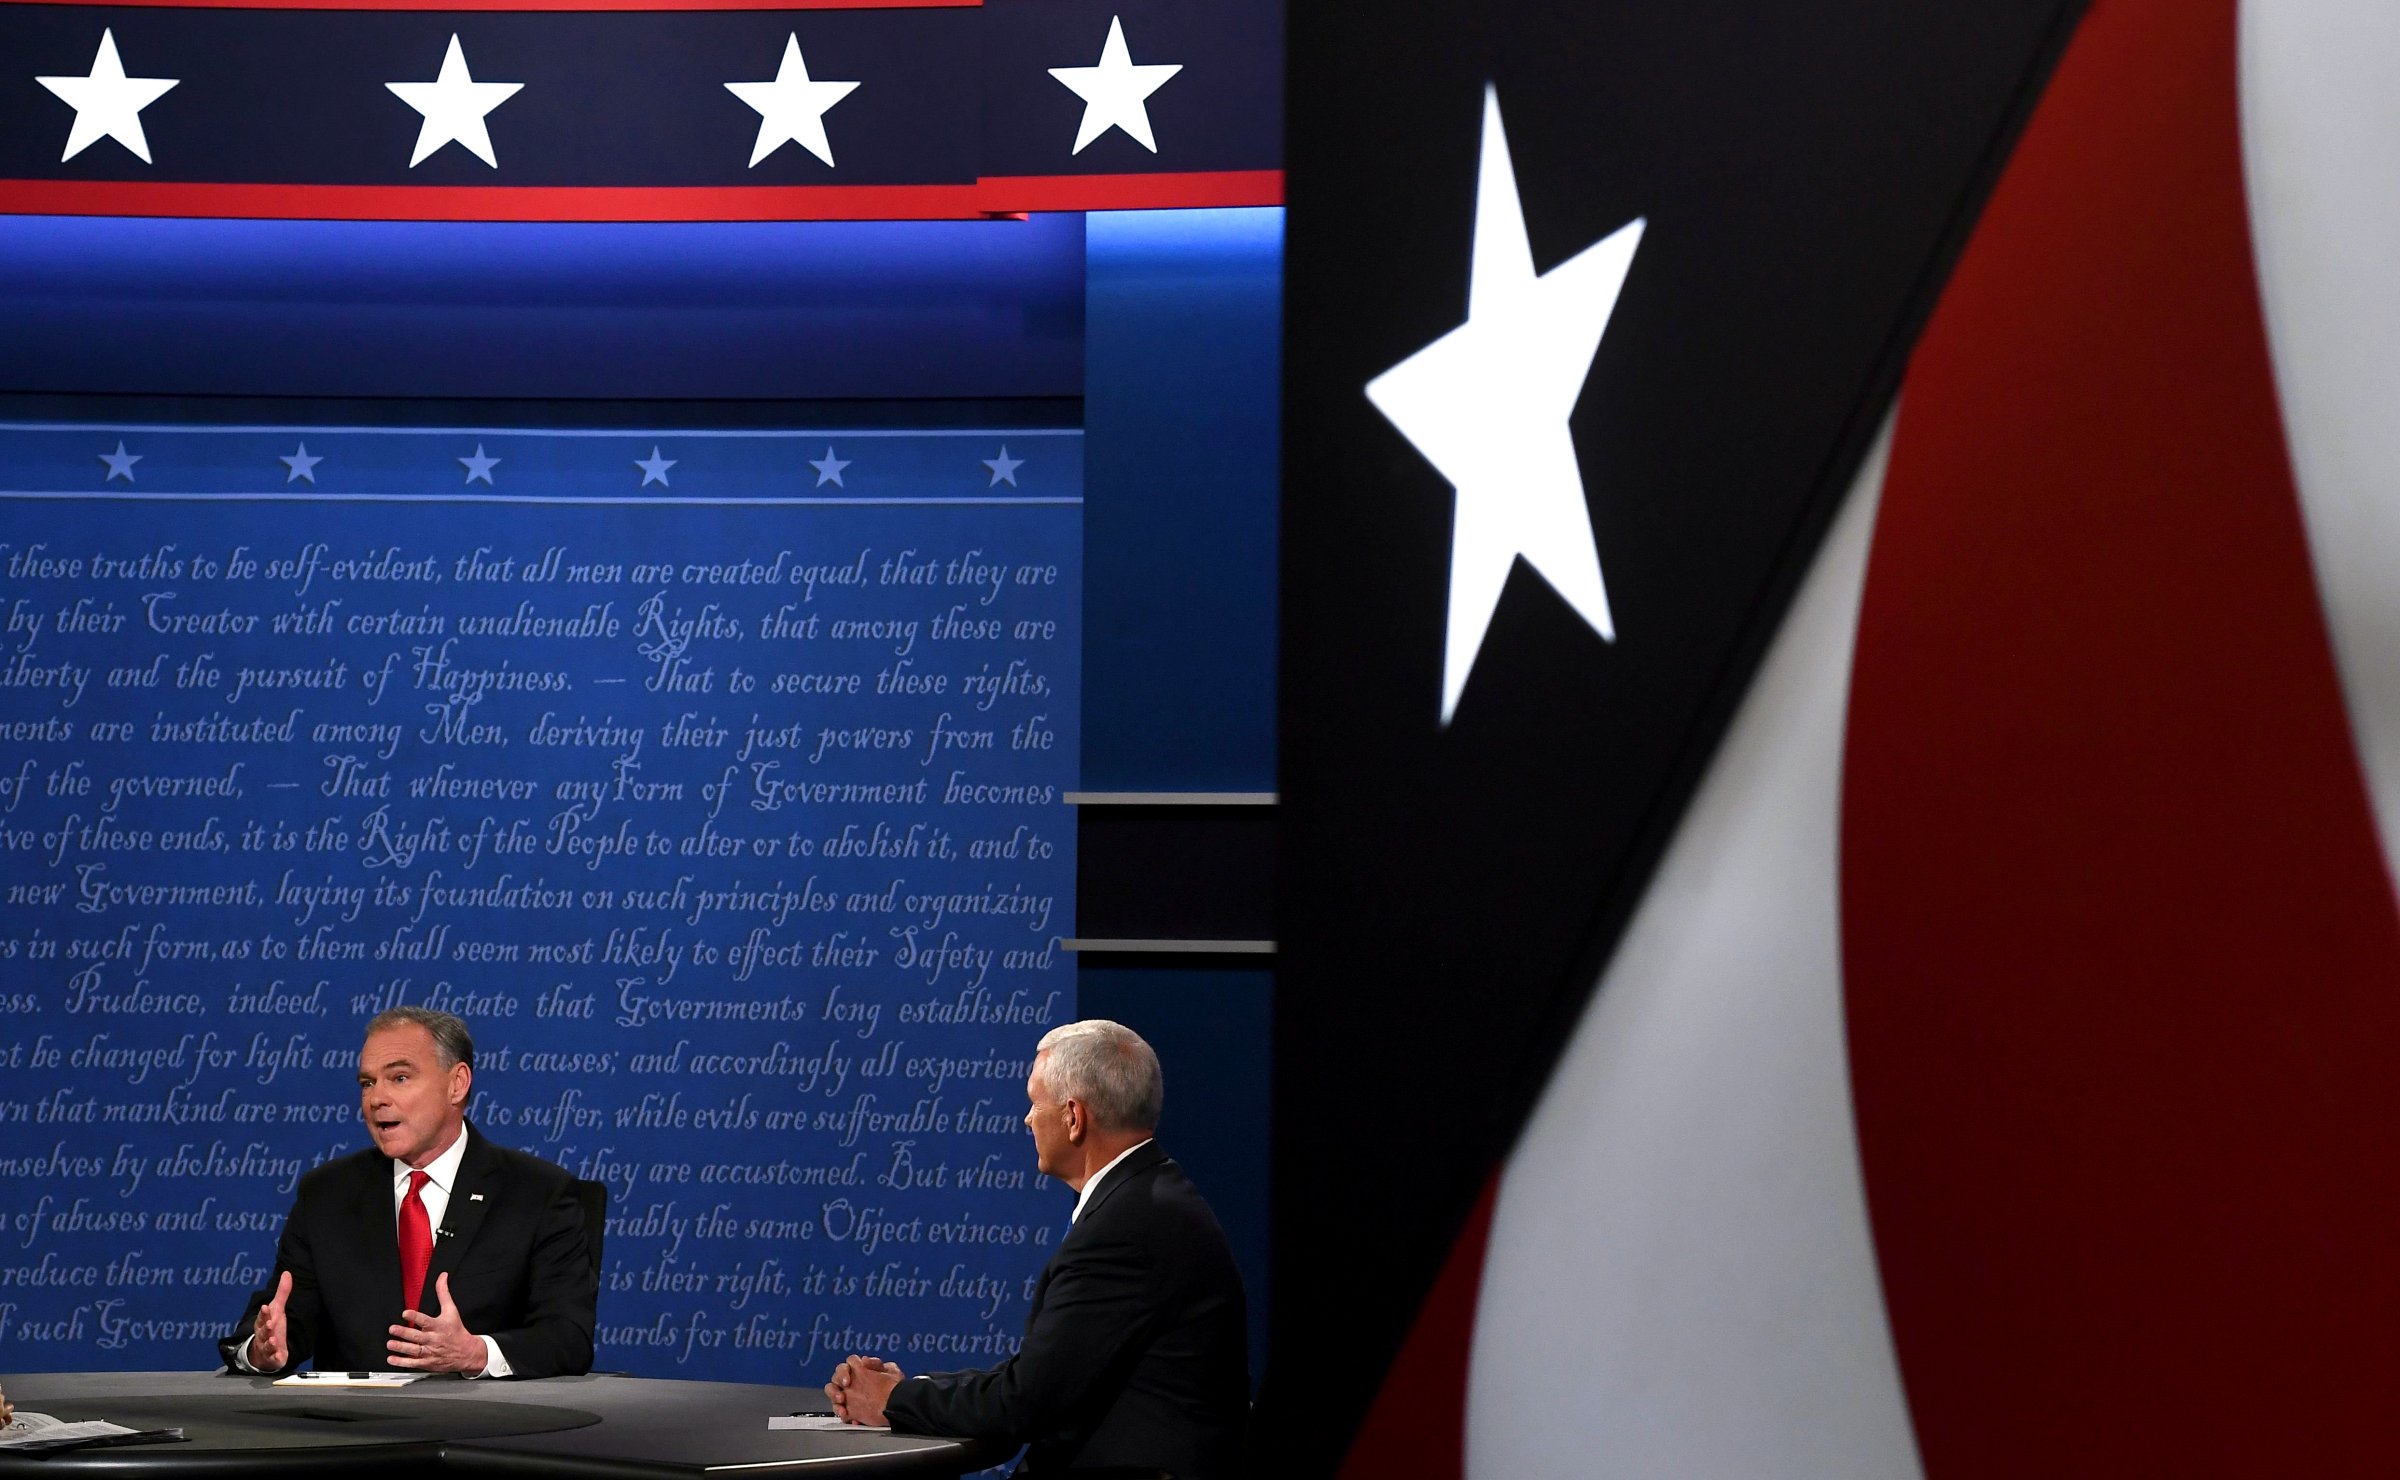 Vice presidential nominees Tim Kaine and Mike Pence speak during the vice presidential debate at Longwood University in Farmville, Va. on Oct. 4, 2016.